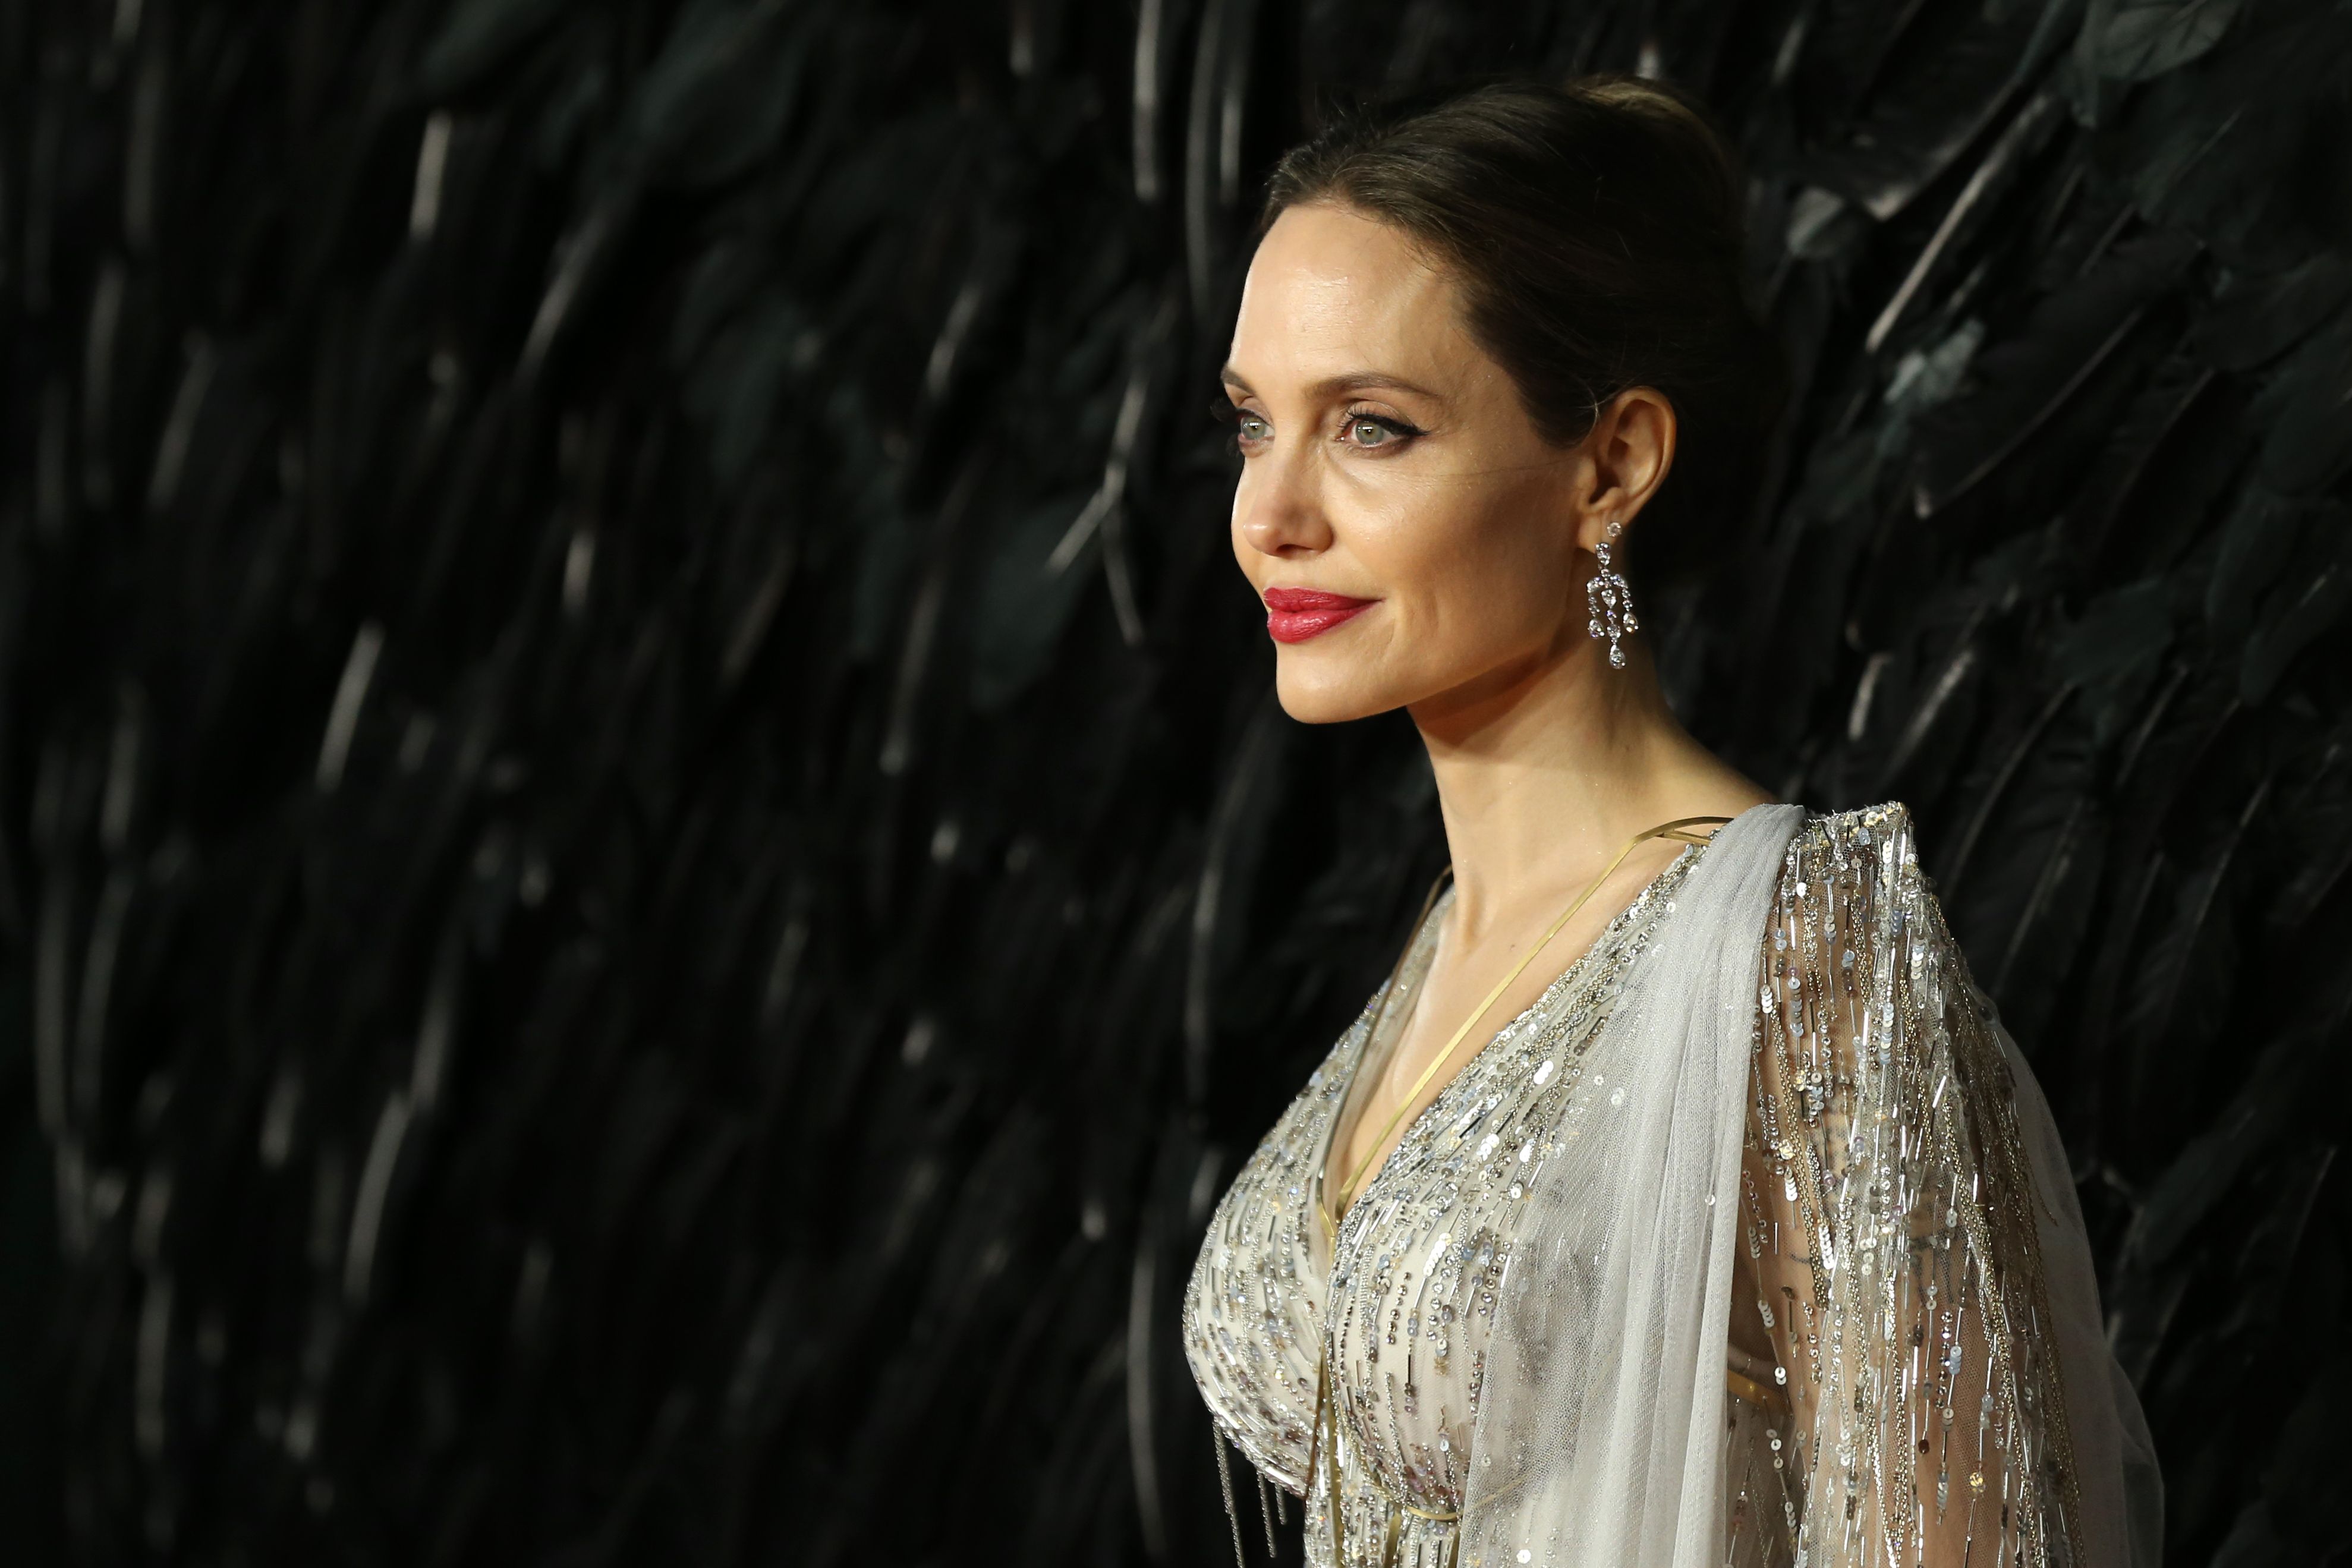 US actress Angelina Jolie poses on the red carpet upon arrival for the European premiere of the film "Maleficent:Mistress of Evil" in London on October 9, 2019. (Photo by ISABEL INFANTES / AFP) (Photo by ISABEL INFANTES/AFP via Getty Images) (AFP via Getty Images)